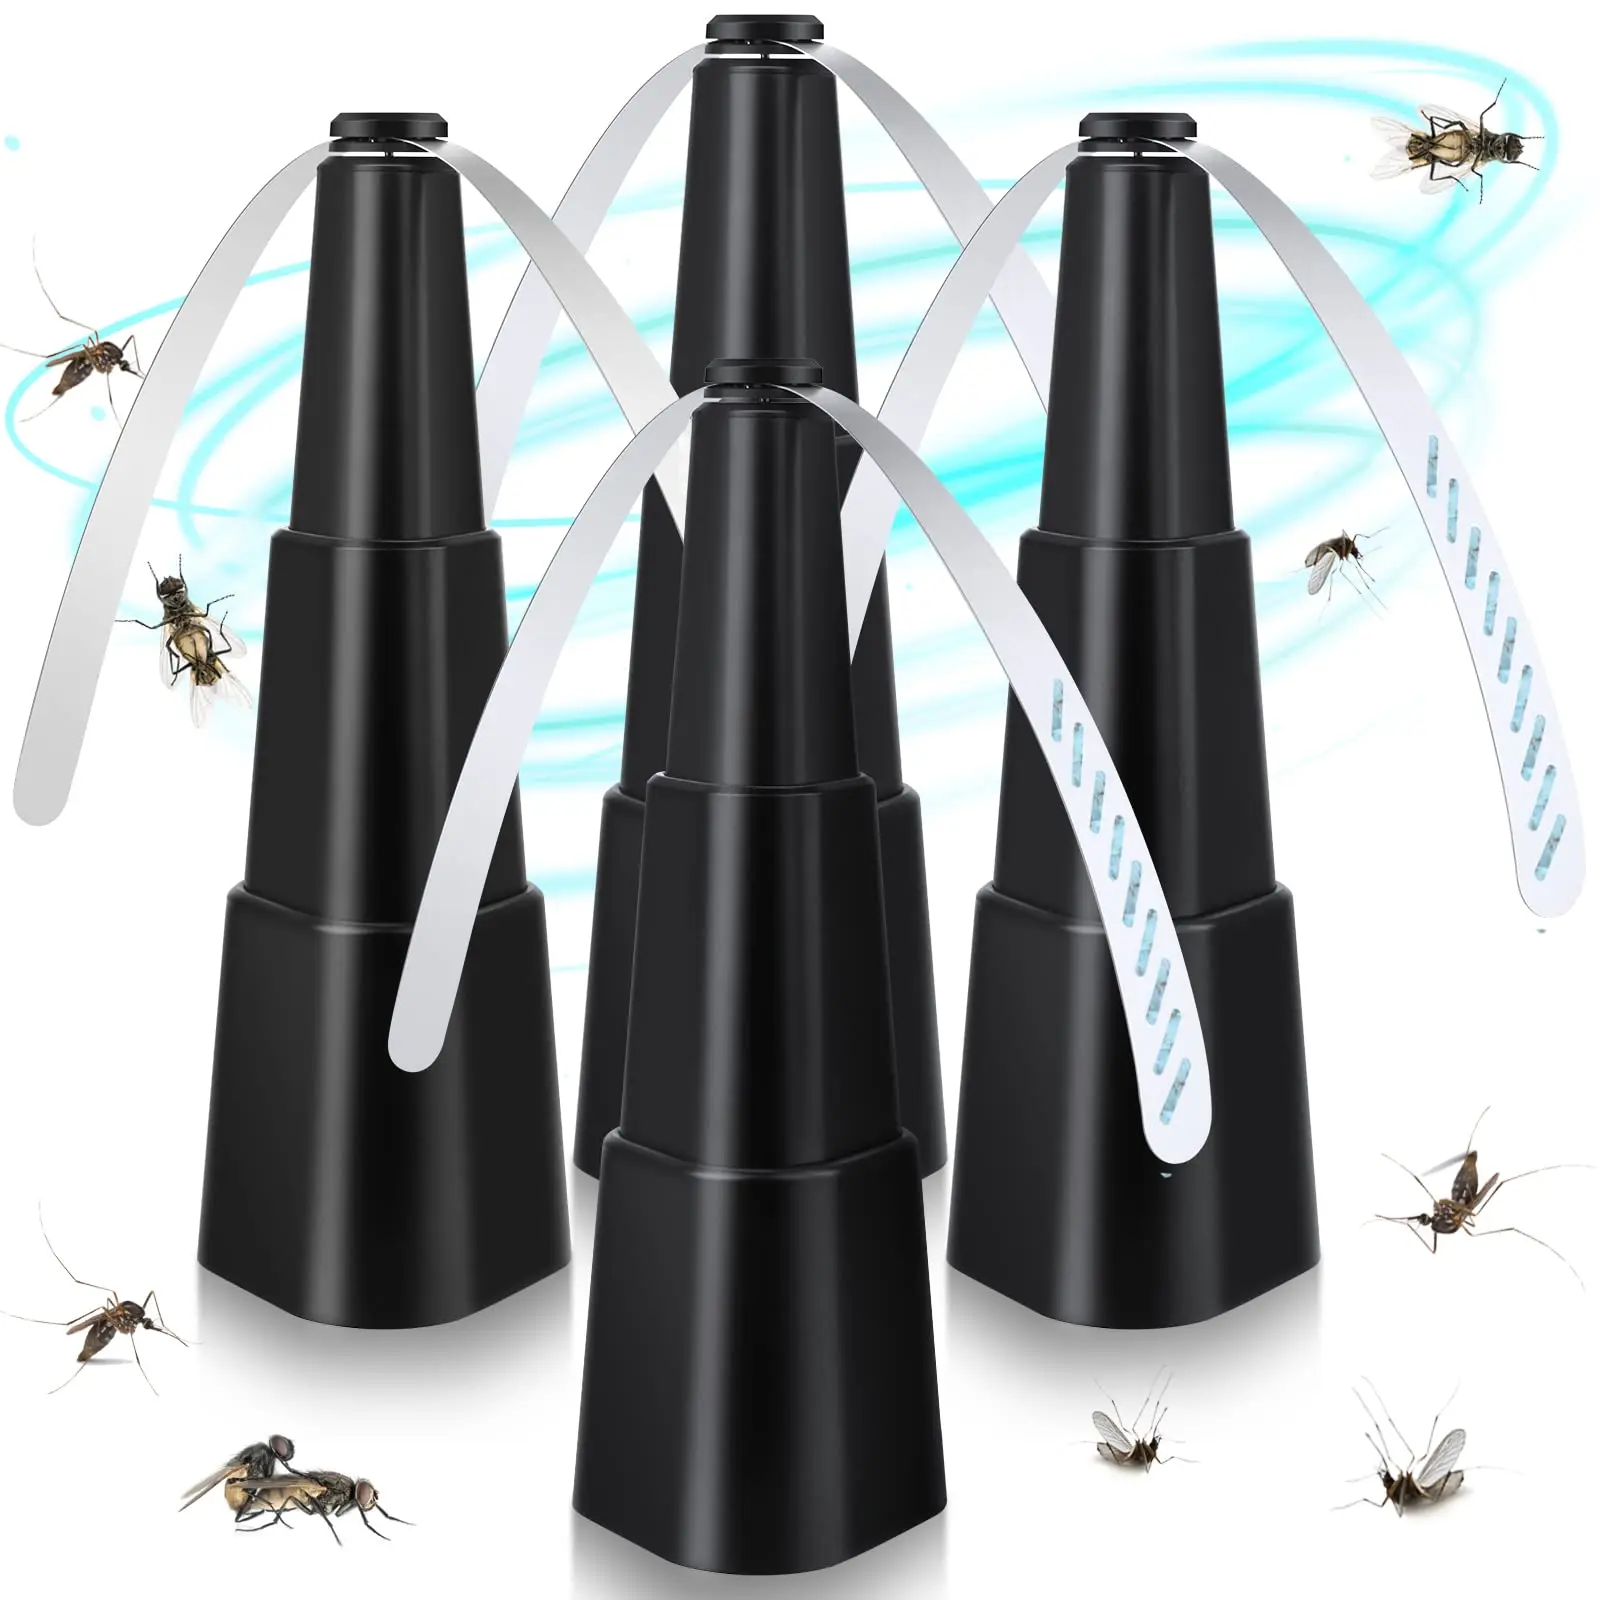 Fly Fans for Tables Fly Repellent Fan Indoor Outdoor with Holographic Blades Keep Flies Away Bug Repellent Outdoor silent fan for automatic flycatcher fly repellent mute fly repellent fan kitchen keep flies and bugs away from your food